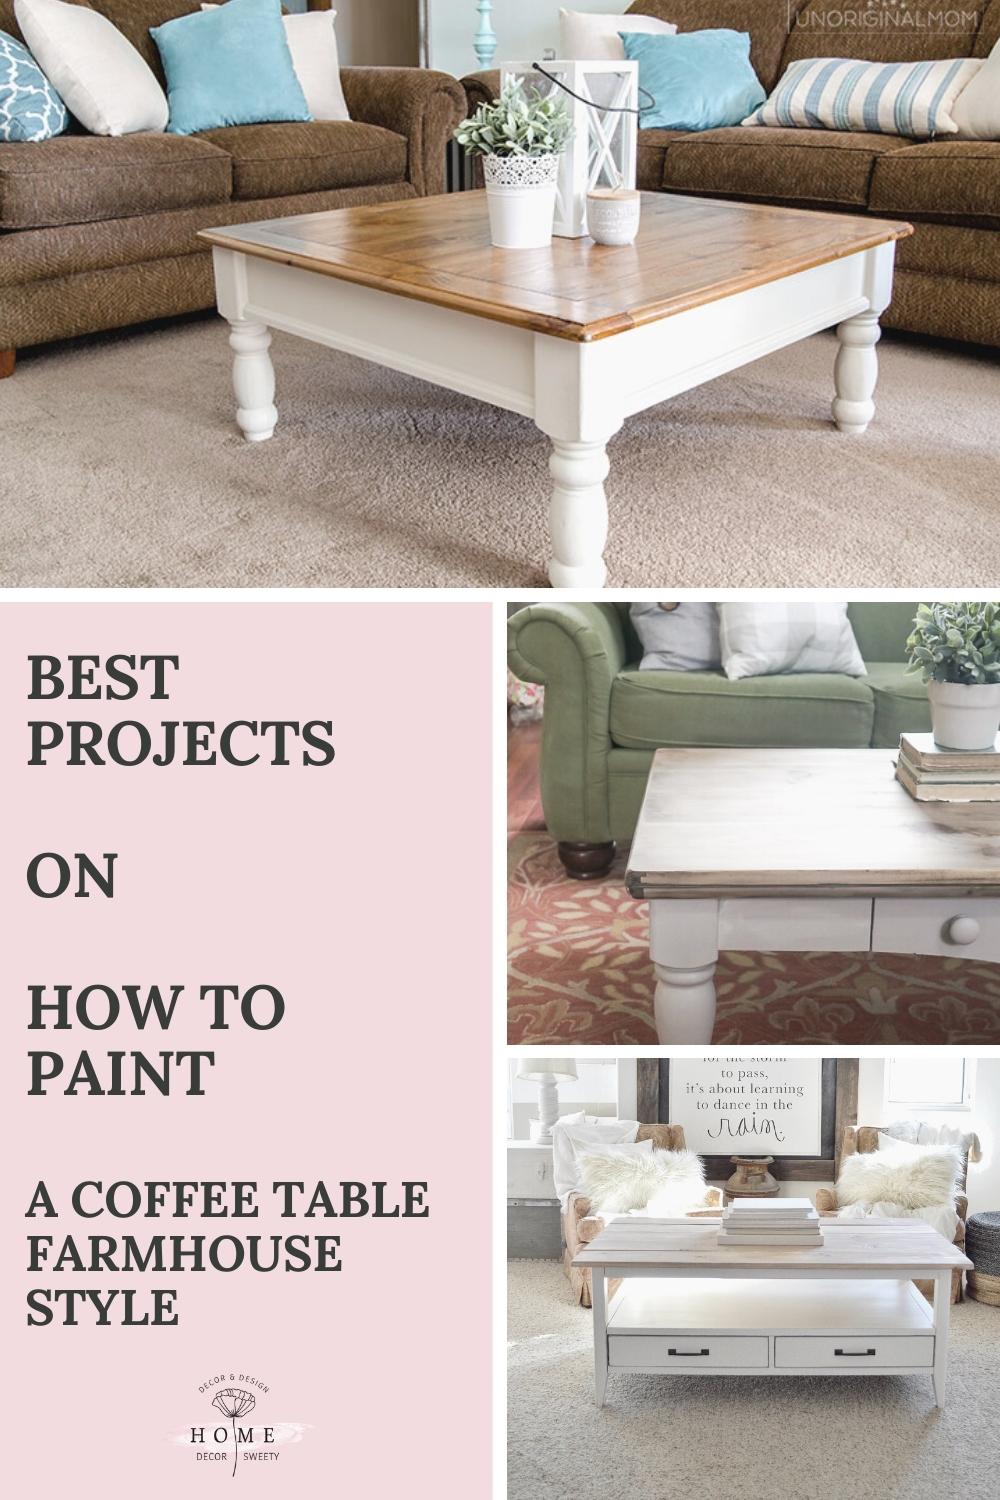 Best Projects on How to Paint a coffee table Farmhouse Style